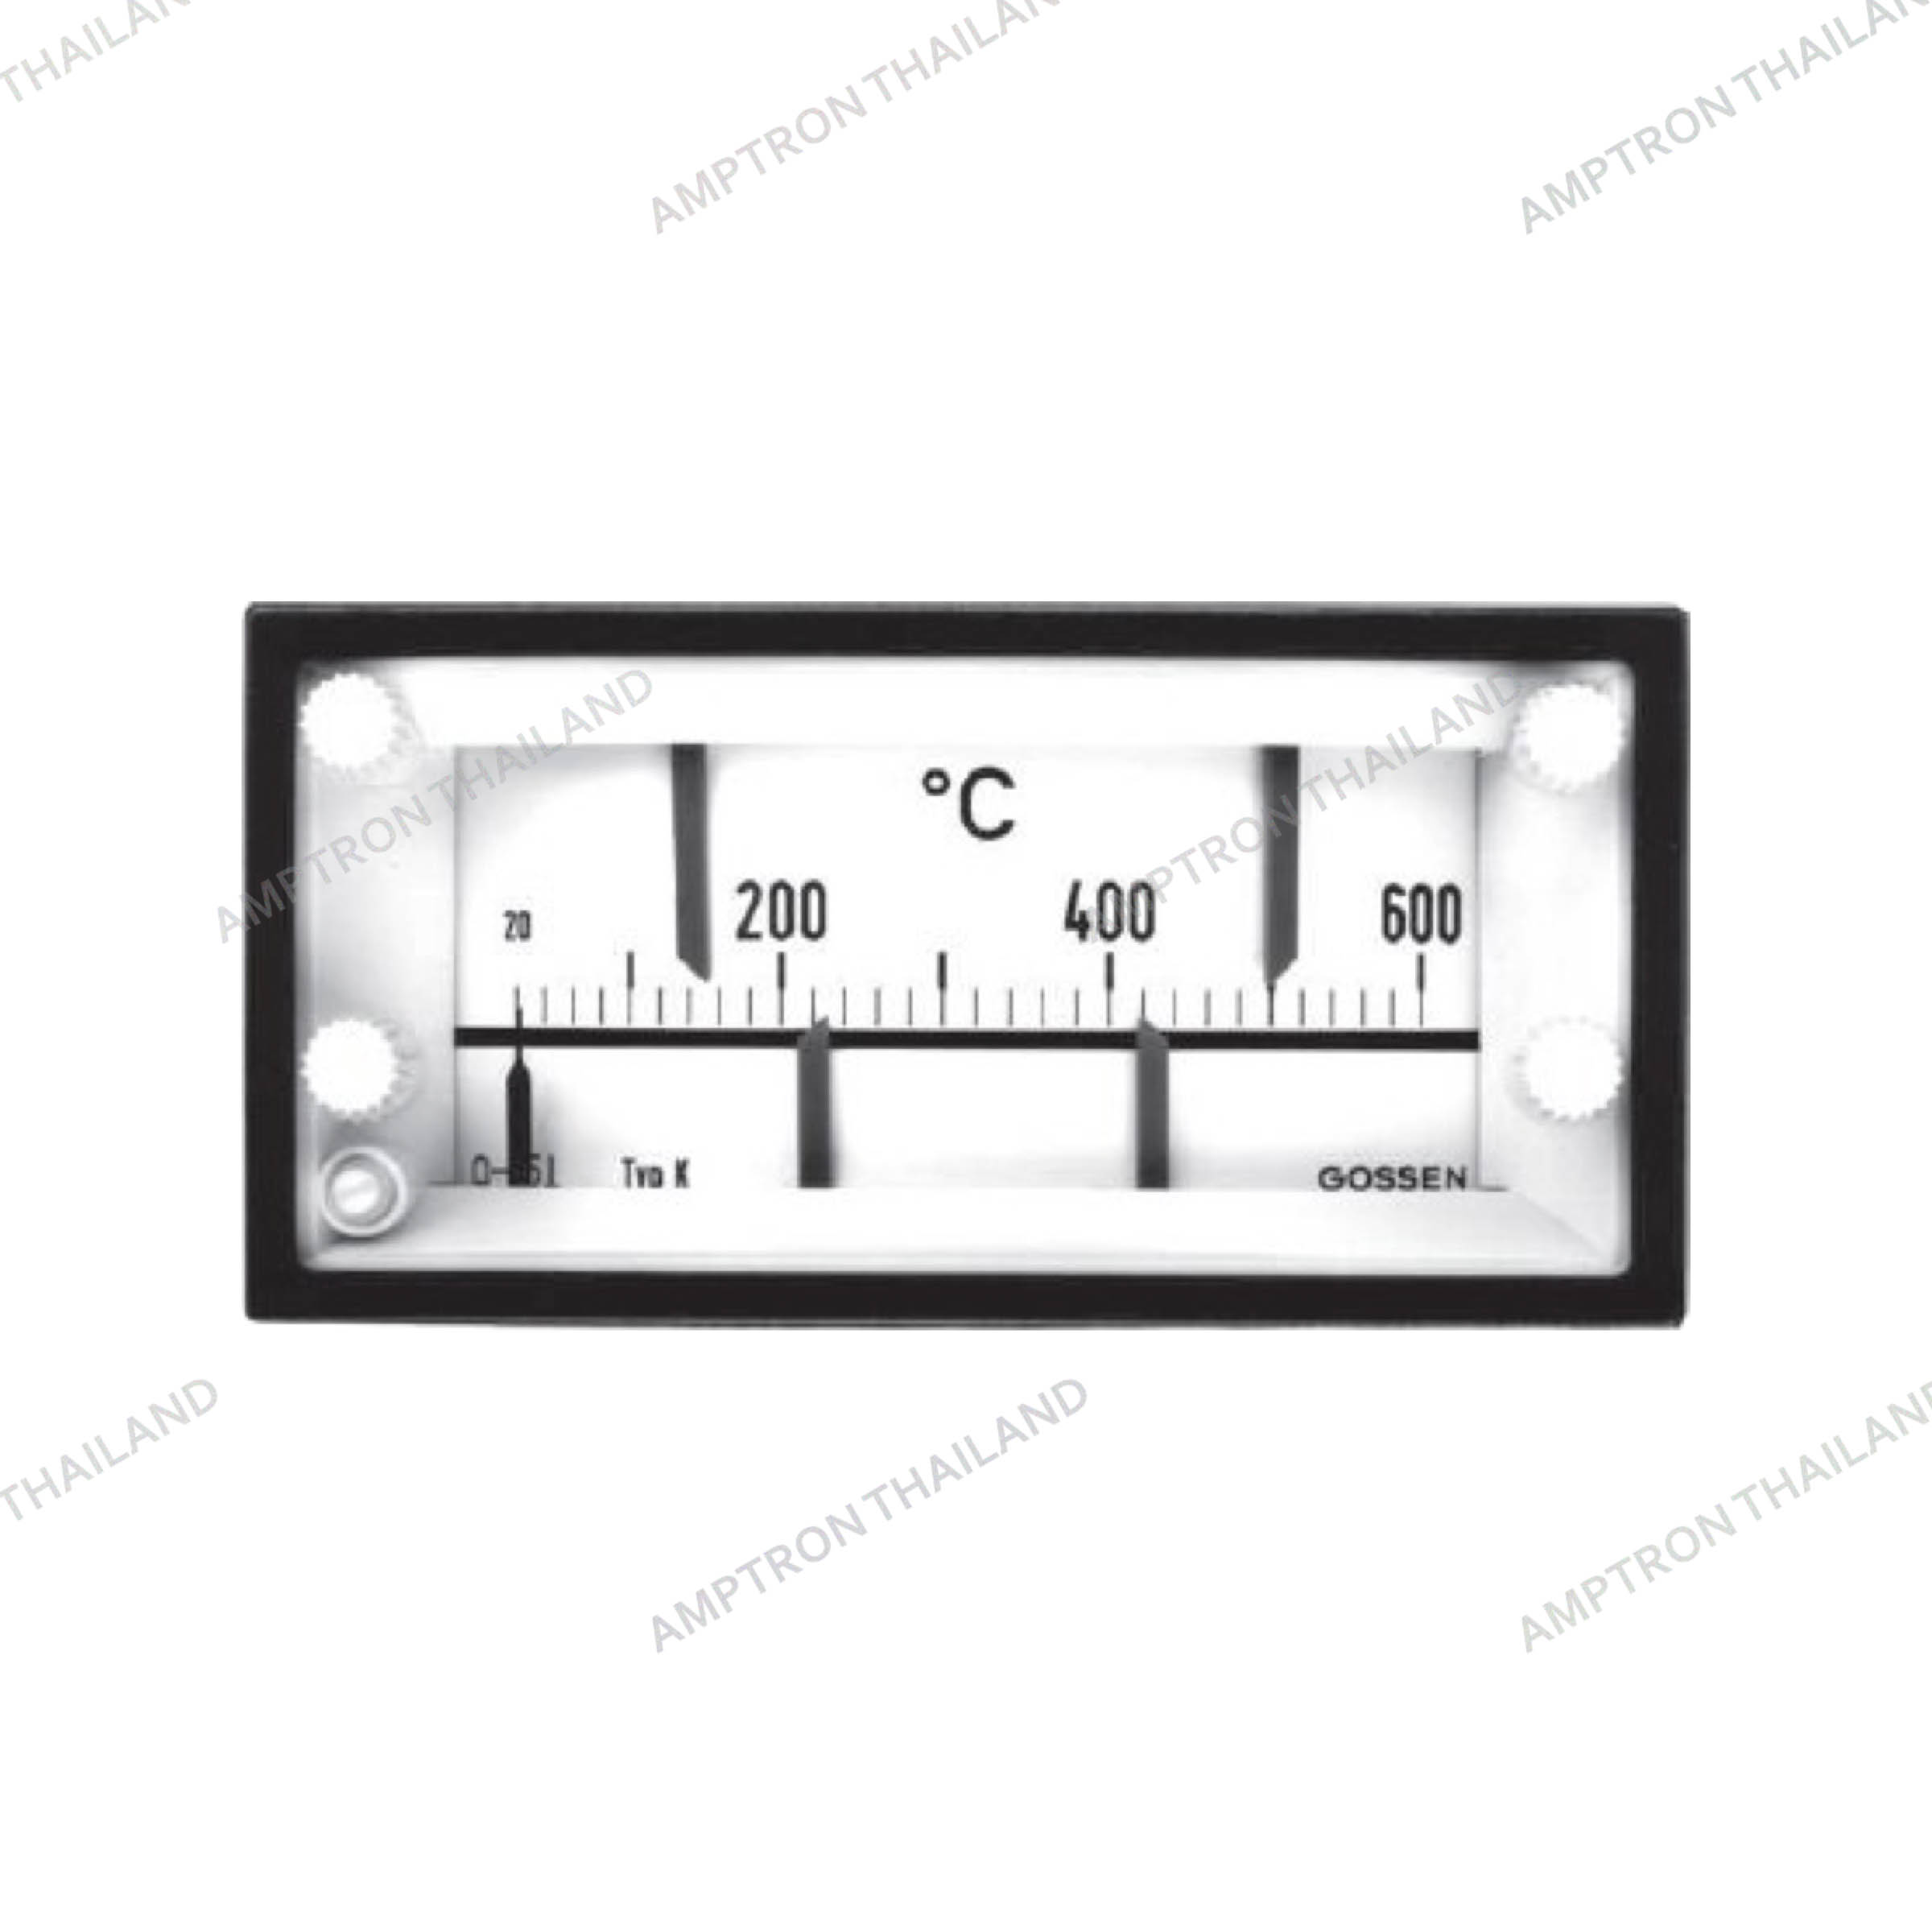 Moving-Coil Panel Meters Indicator/Controller with 4 Limit Contacts (PFN)